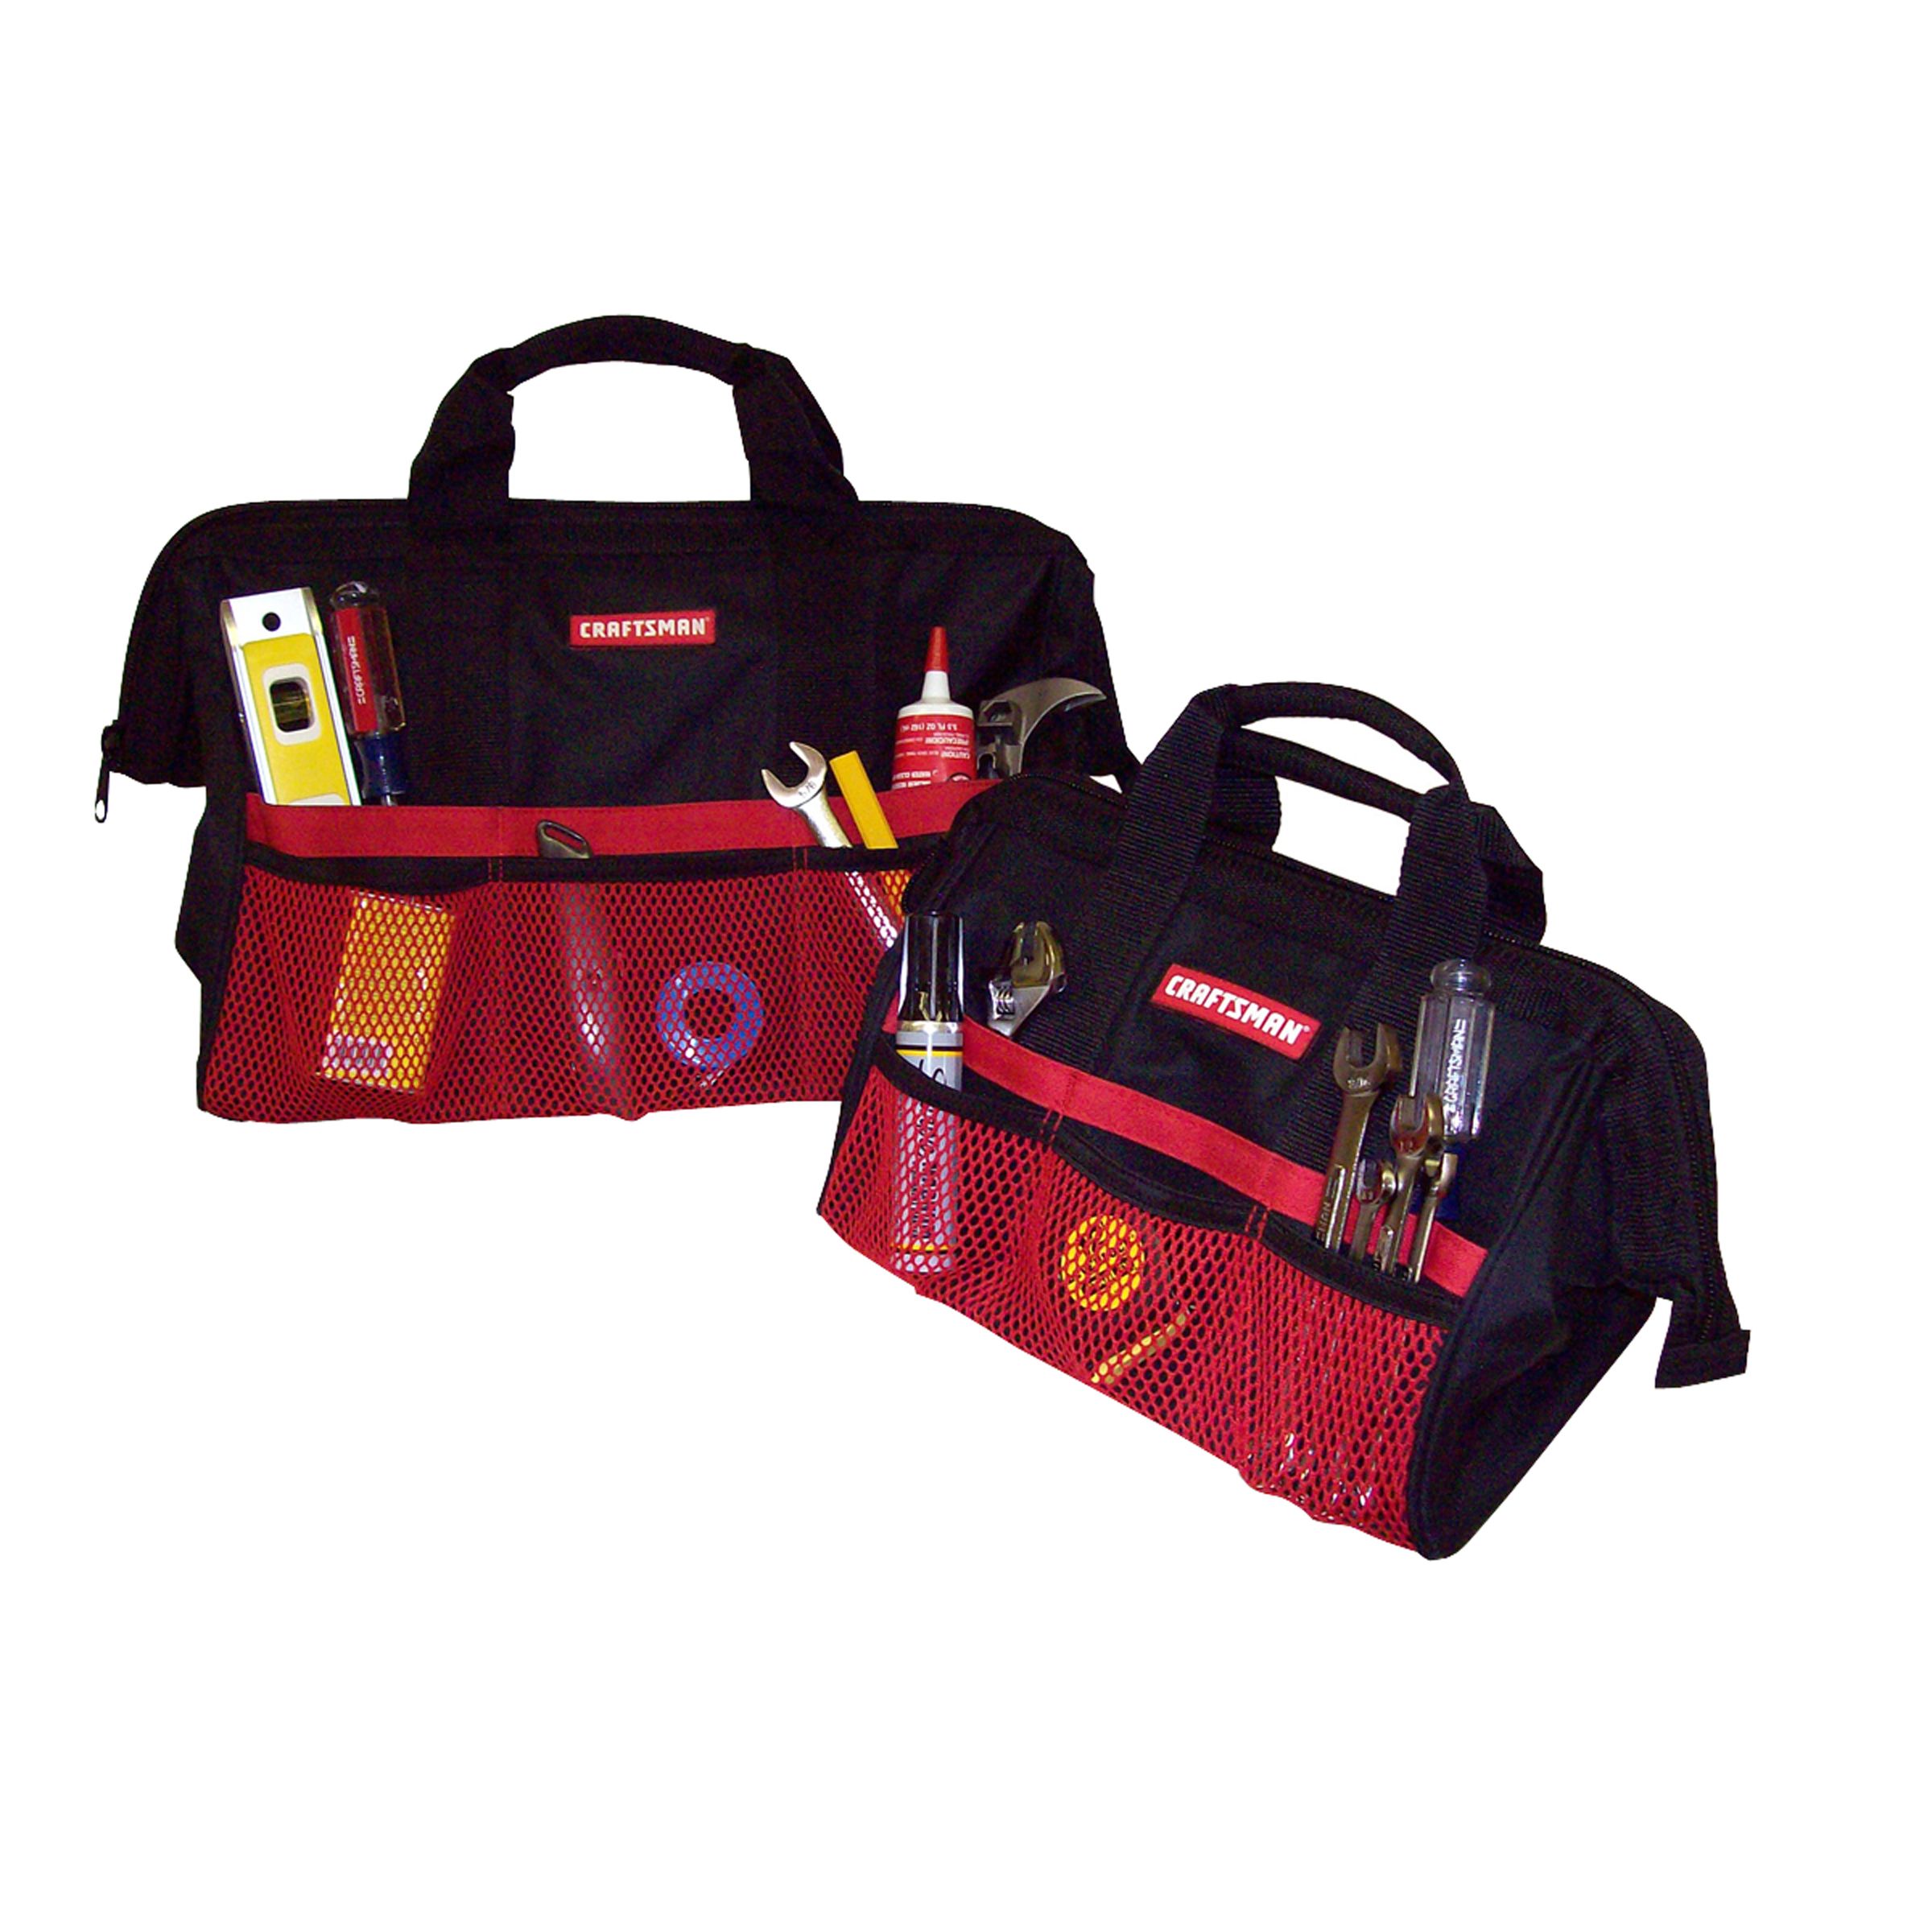 Craftsman 13″ and 18″ Tool Bag Combo Only $9.99 (Reg $19.99)